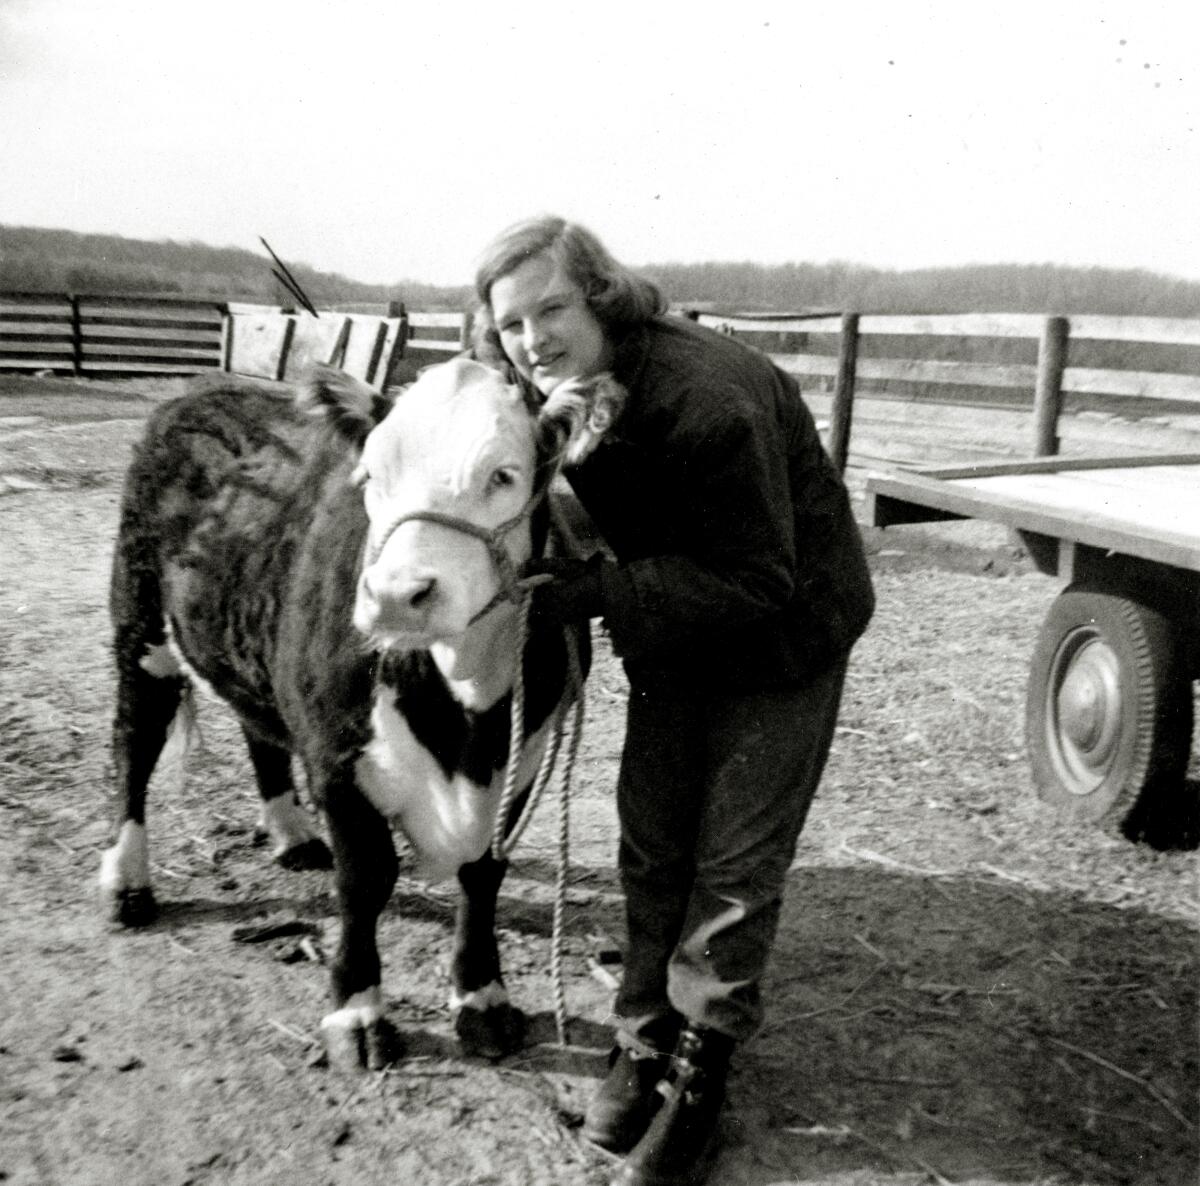 A black-and-white photo of a girl with short hair posing with her steer.